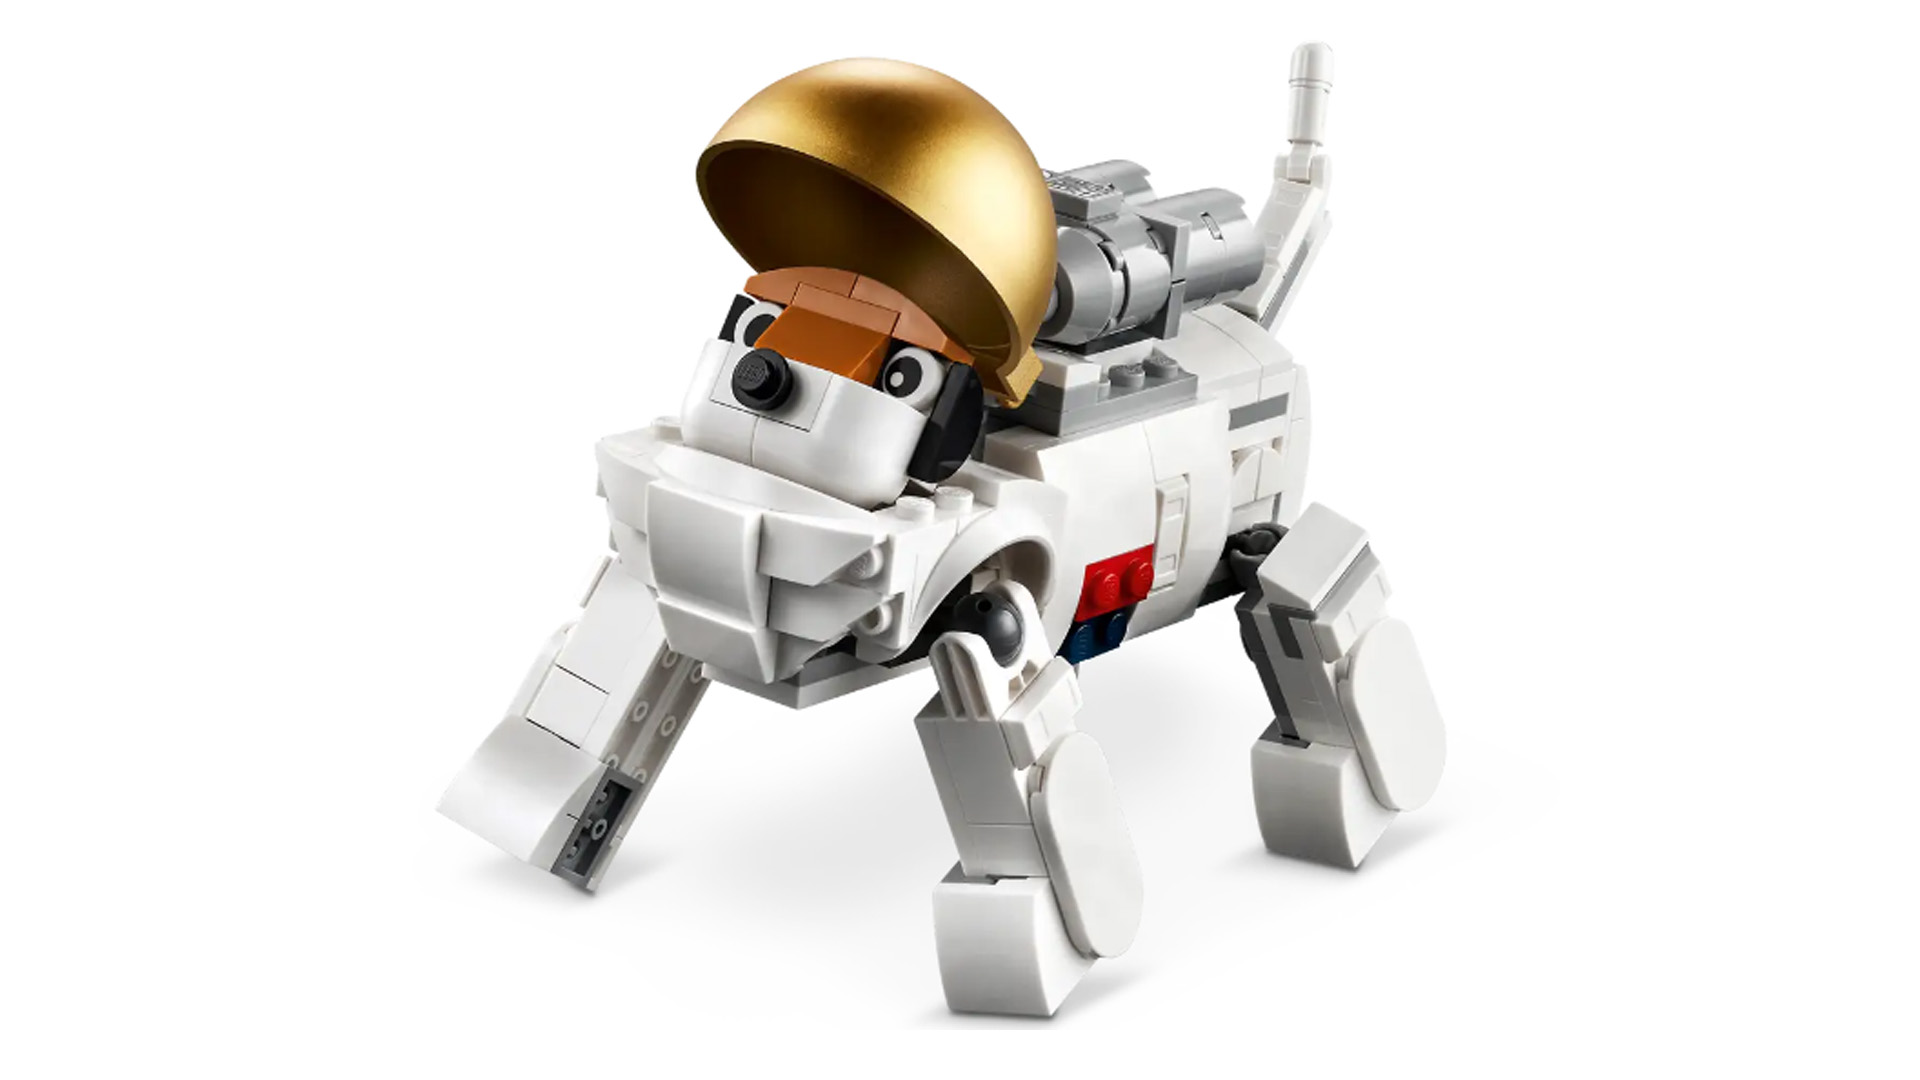 An alternative build of the Lego Creator 3-in-1 Space Astronaut